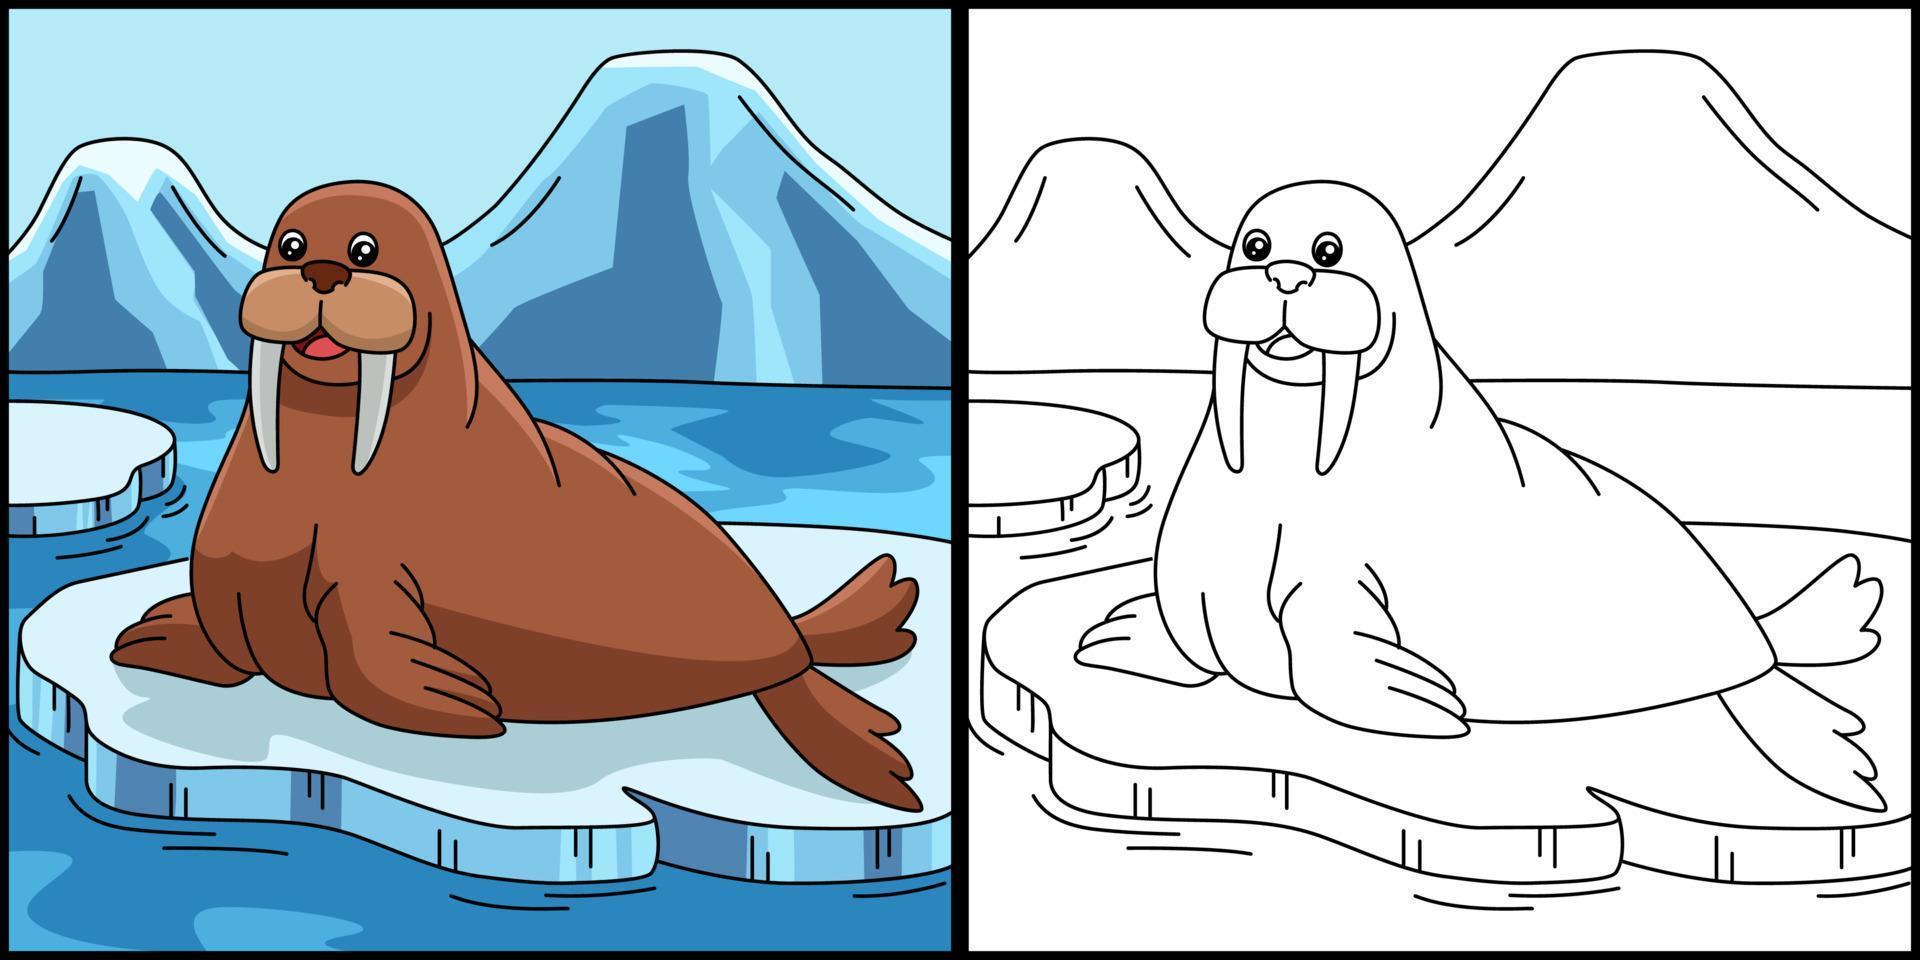 Walrus Coloring Page Colored Illustration vector